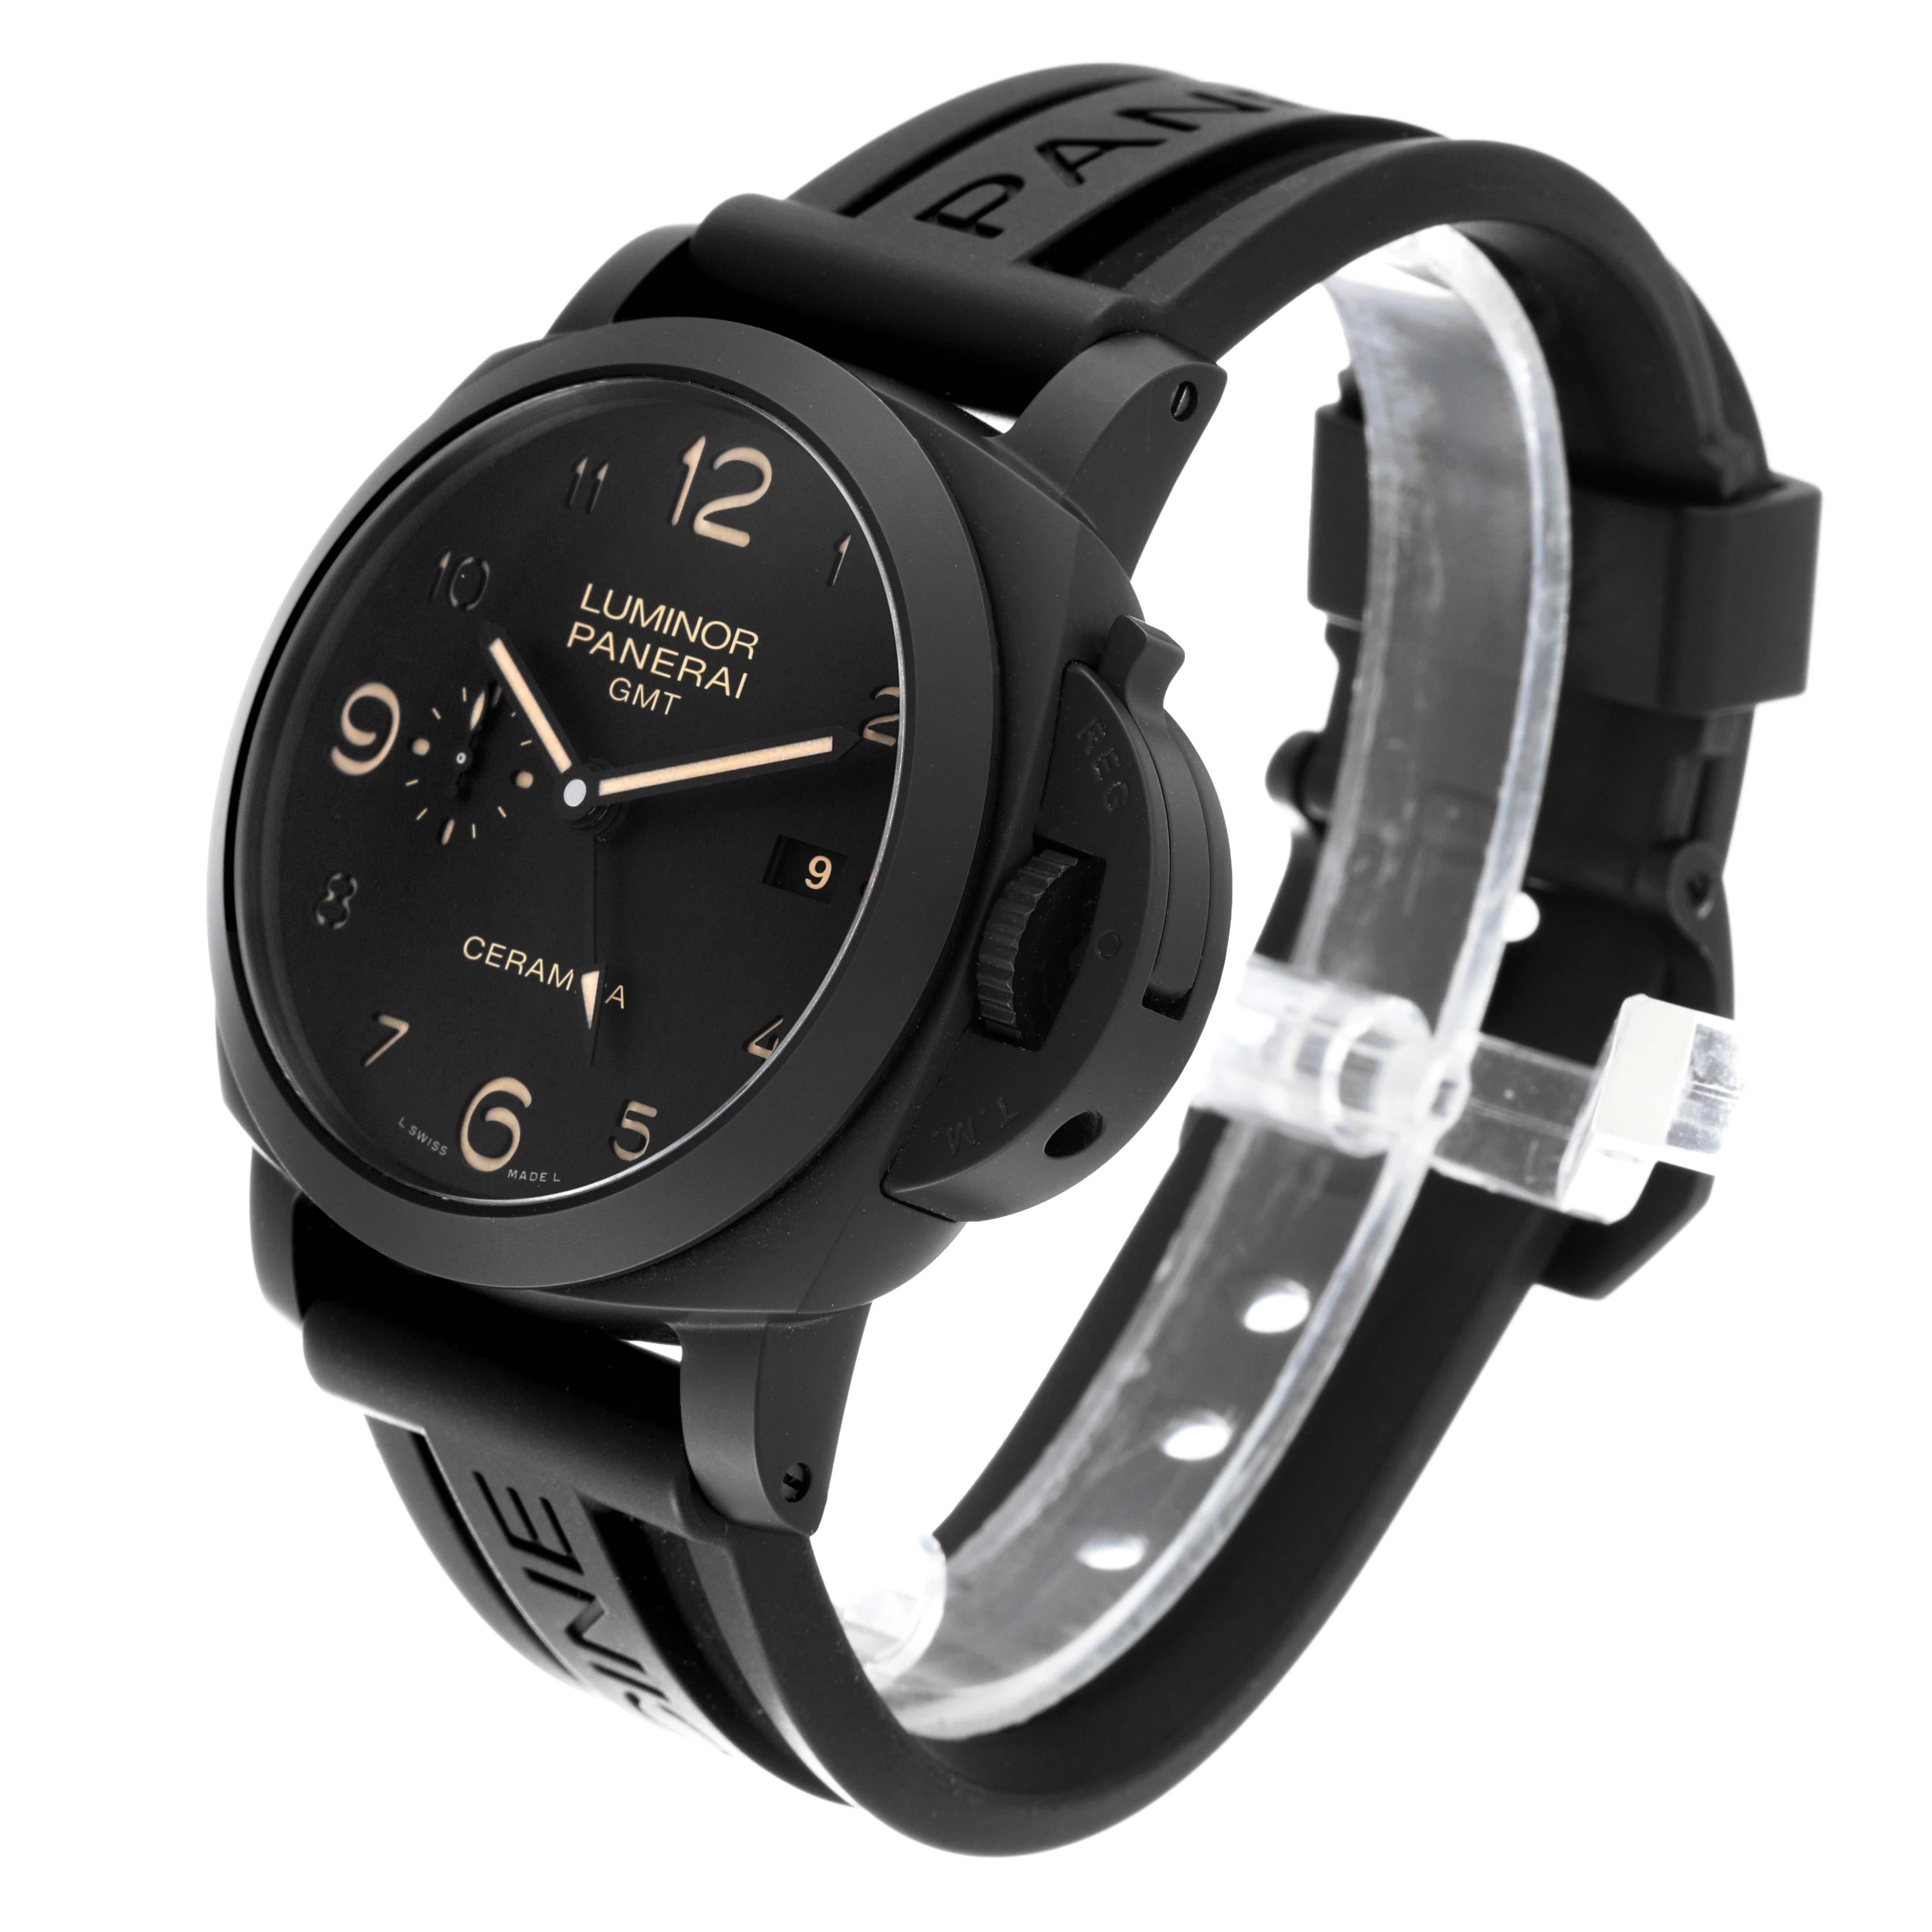 Panerai Luminor 1950 3 Days GMT Ceramic Limited Edition Mens Watch PAM00441 In Excellent Condition For Sale In Atlanta, GA